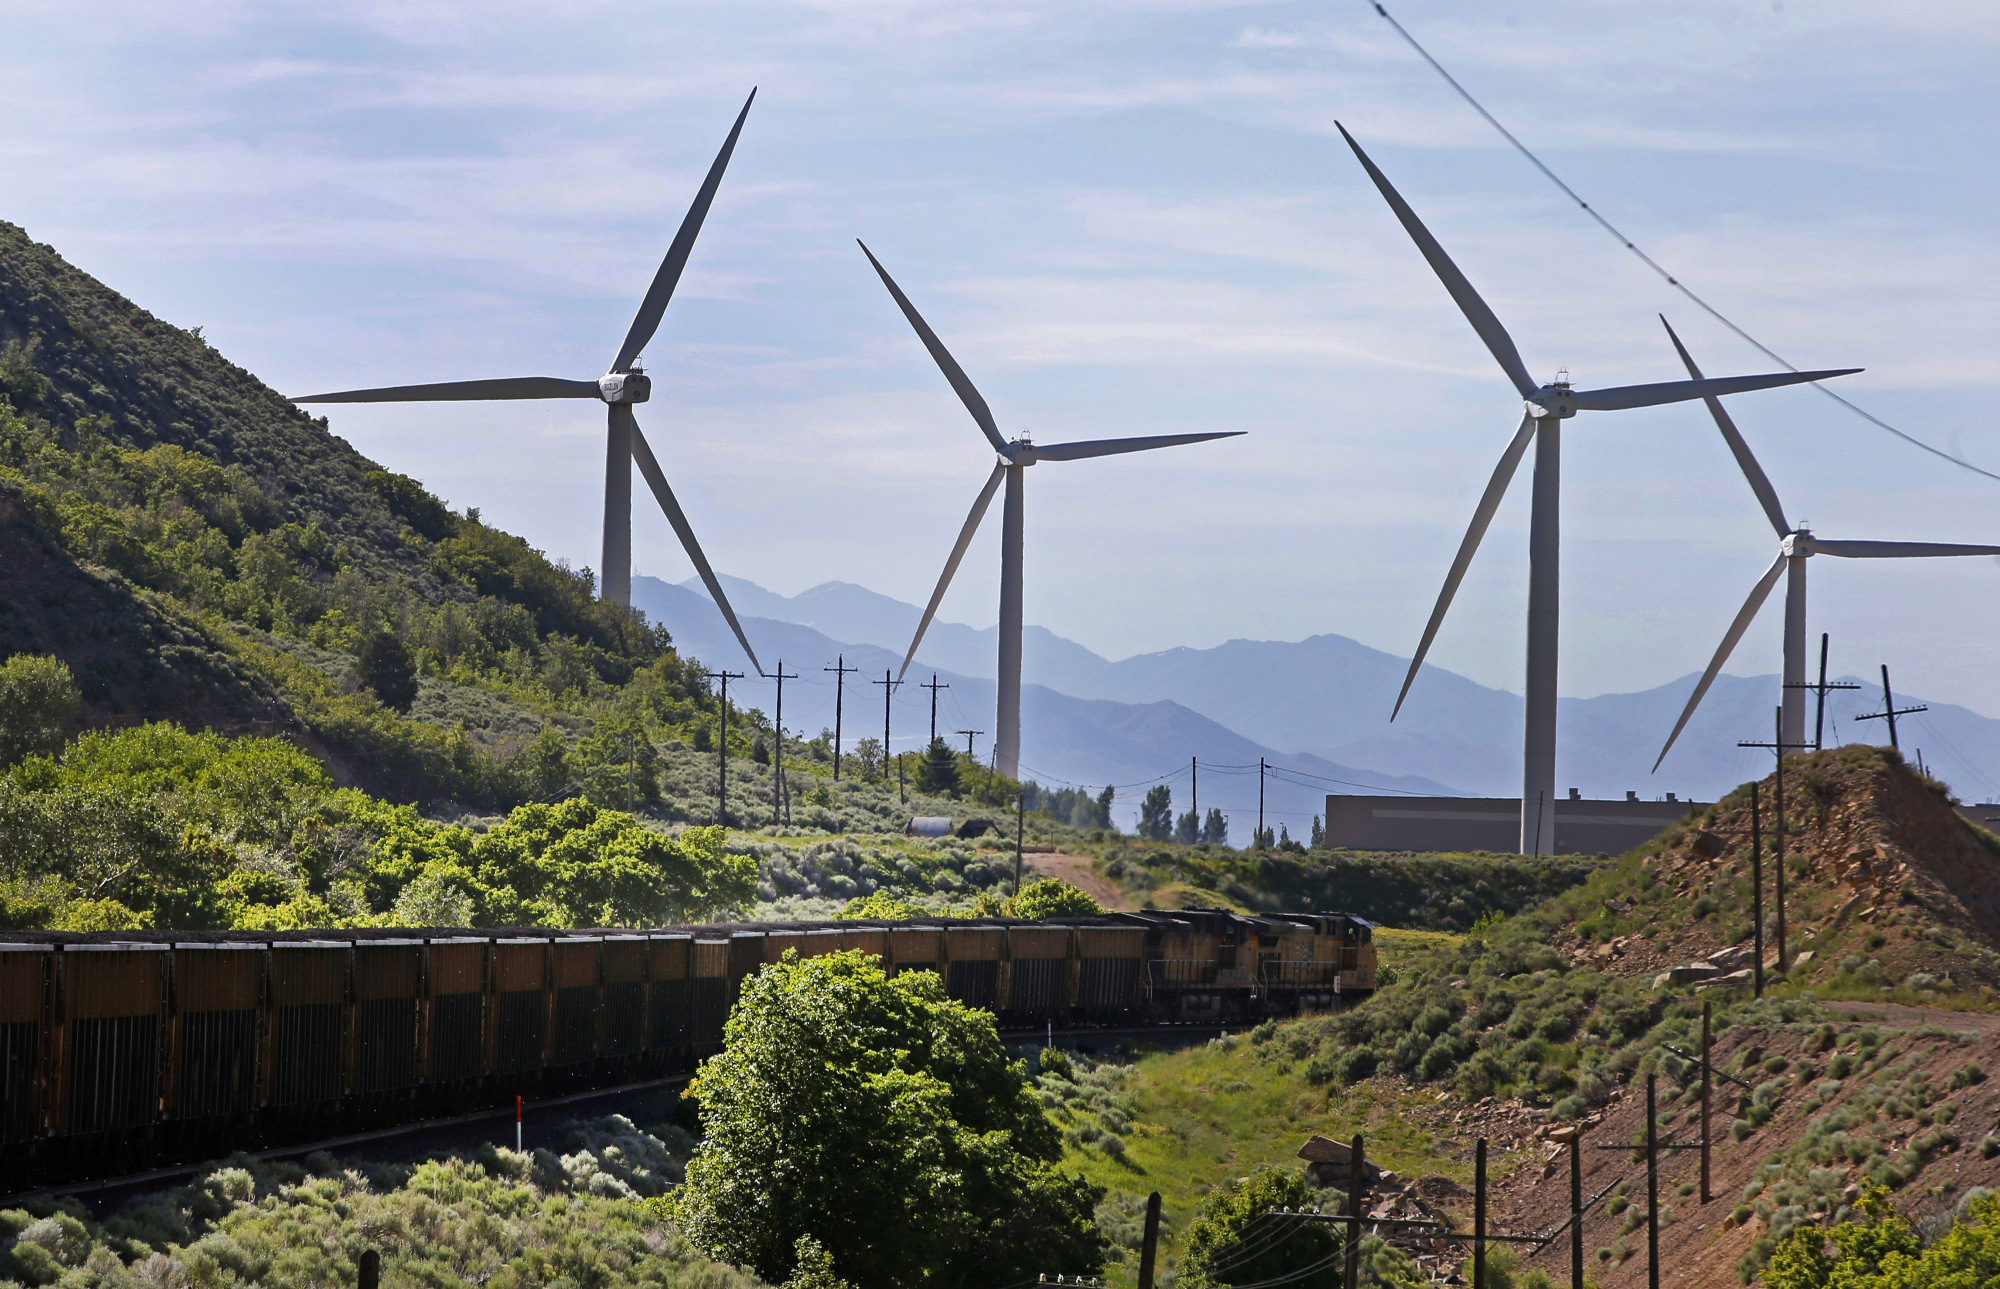 A train transporting coal moves past wind turbines in Spanish Fork, Utah.